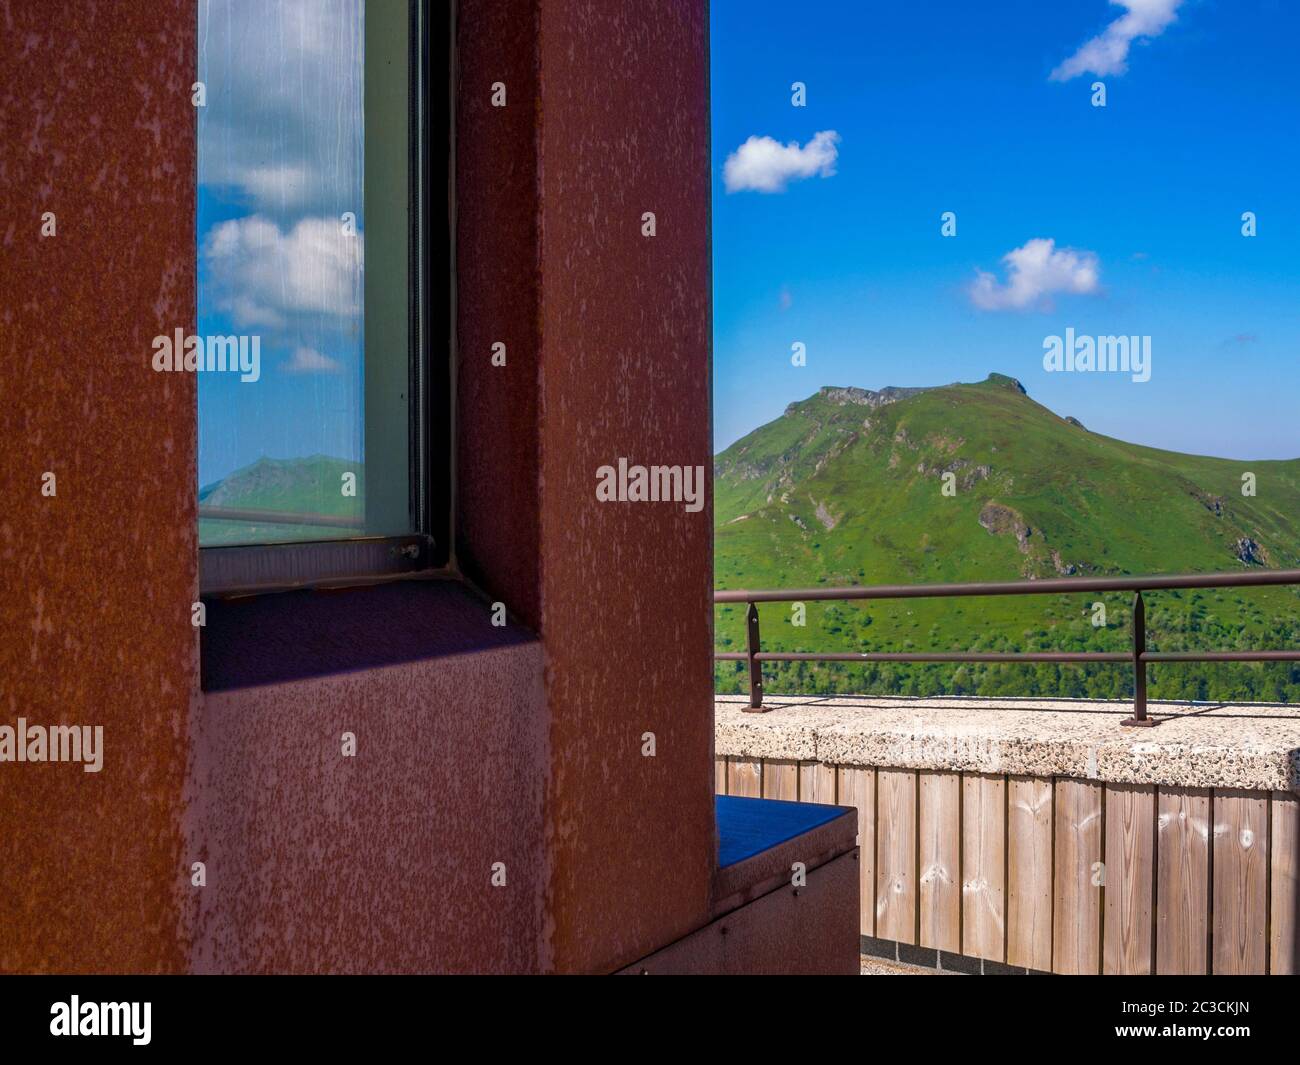 Window and mountain, Puy Mary, Cantal, Auvergne-Rhone-Alpes, France Stock Photo